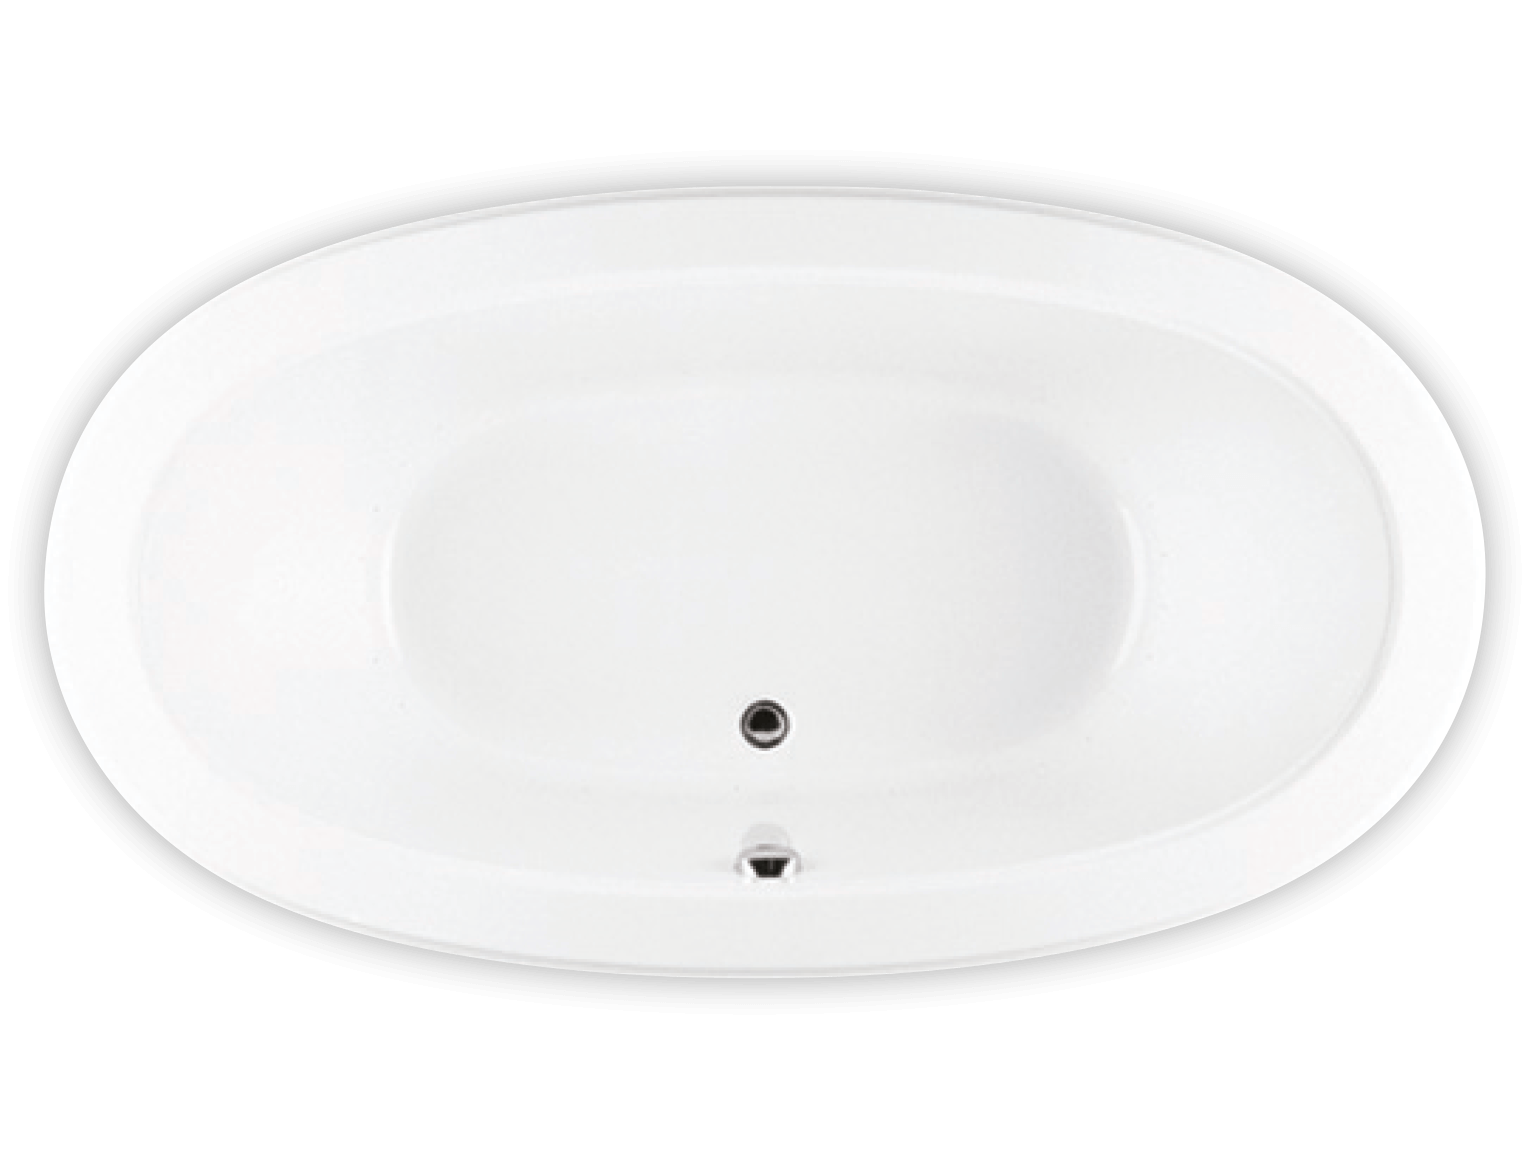 Bainultra Sanos 7240 two person large freestanding air jet bathtub for your modern bathroom